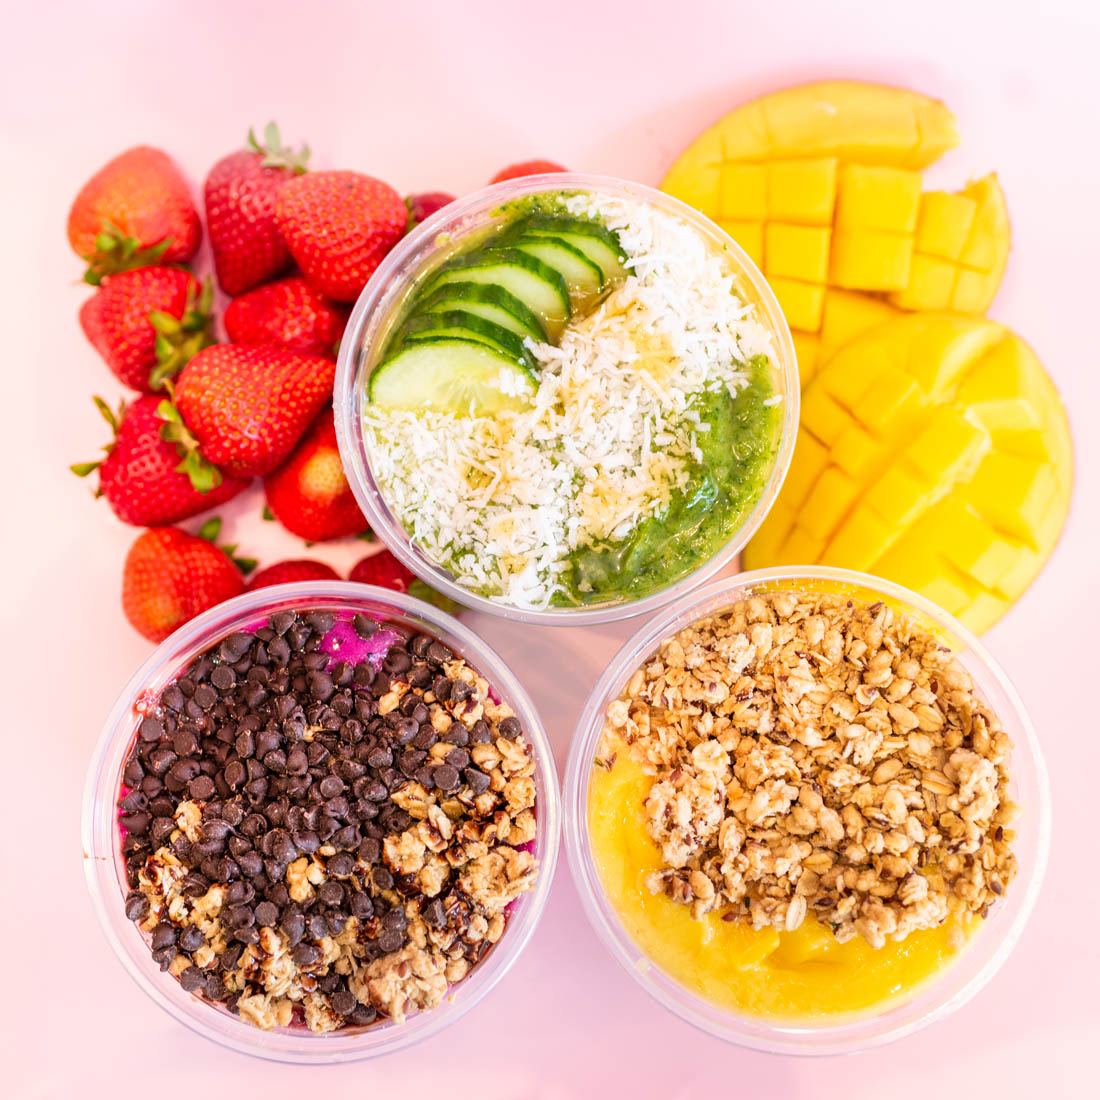 Rush Bowls smoothie bowls nutrition info in Sandy Springs, GA.